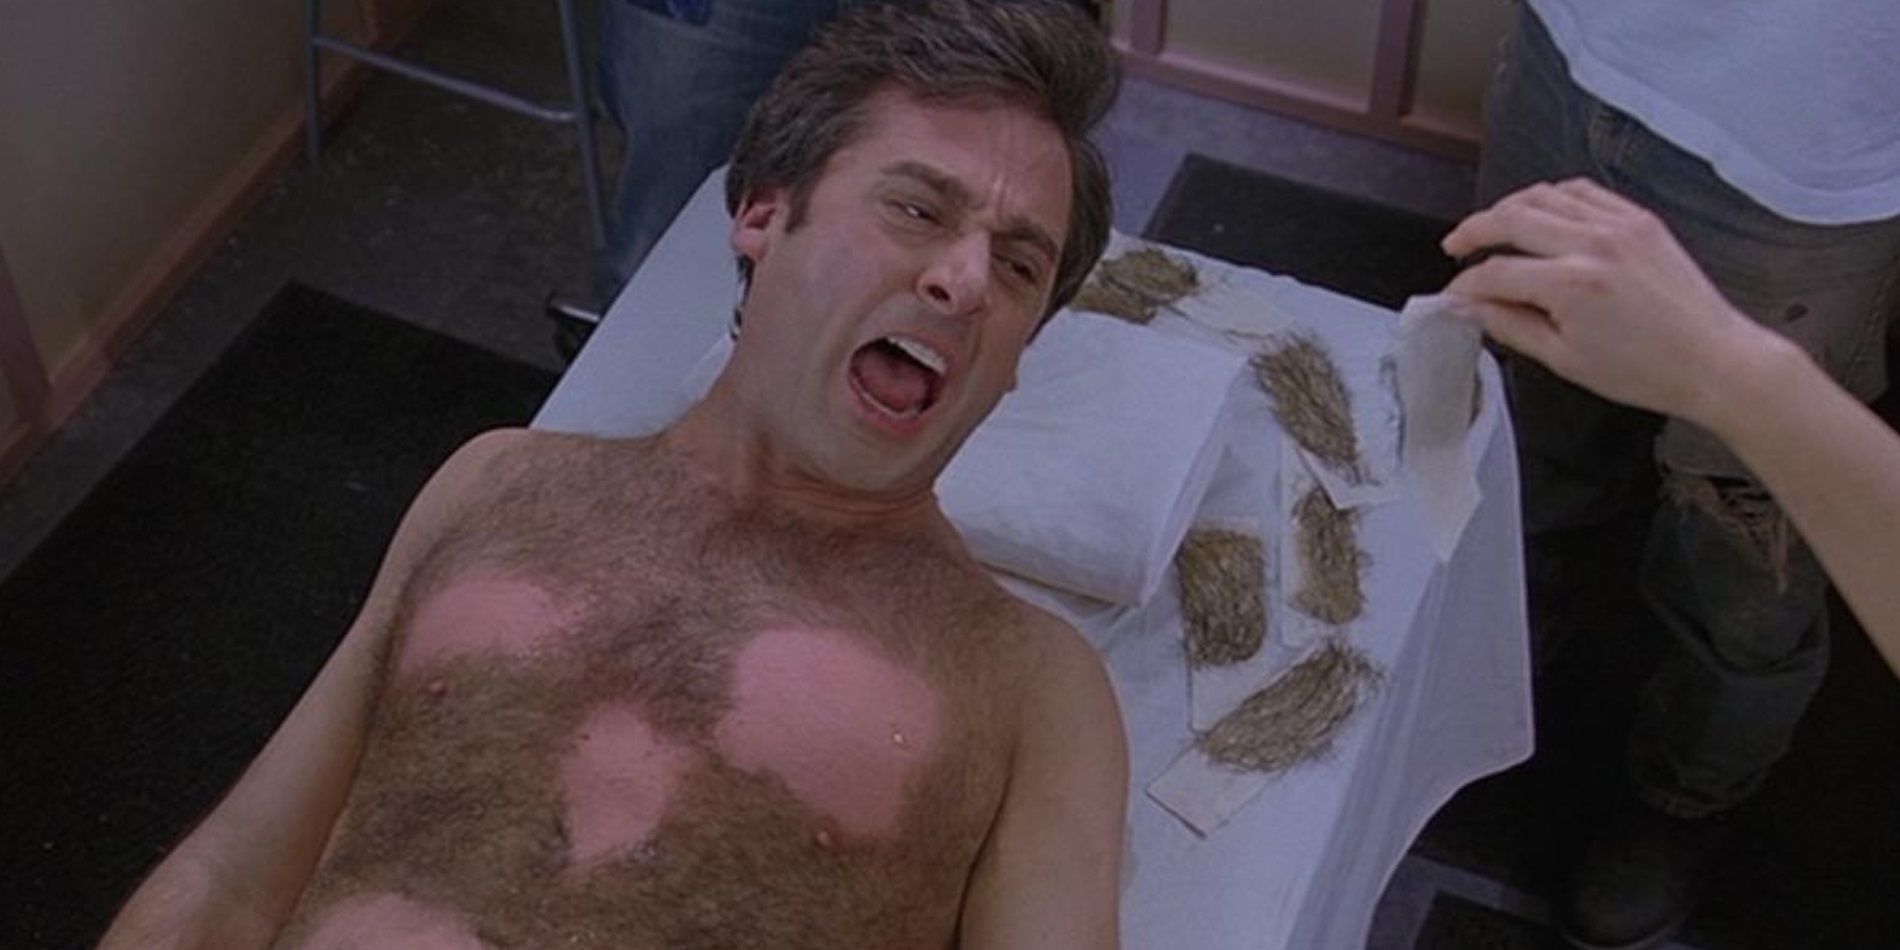 Steve Carell yelling during chest waxing scene in The-40-Year-Old-Virgin